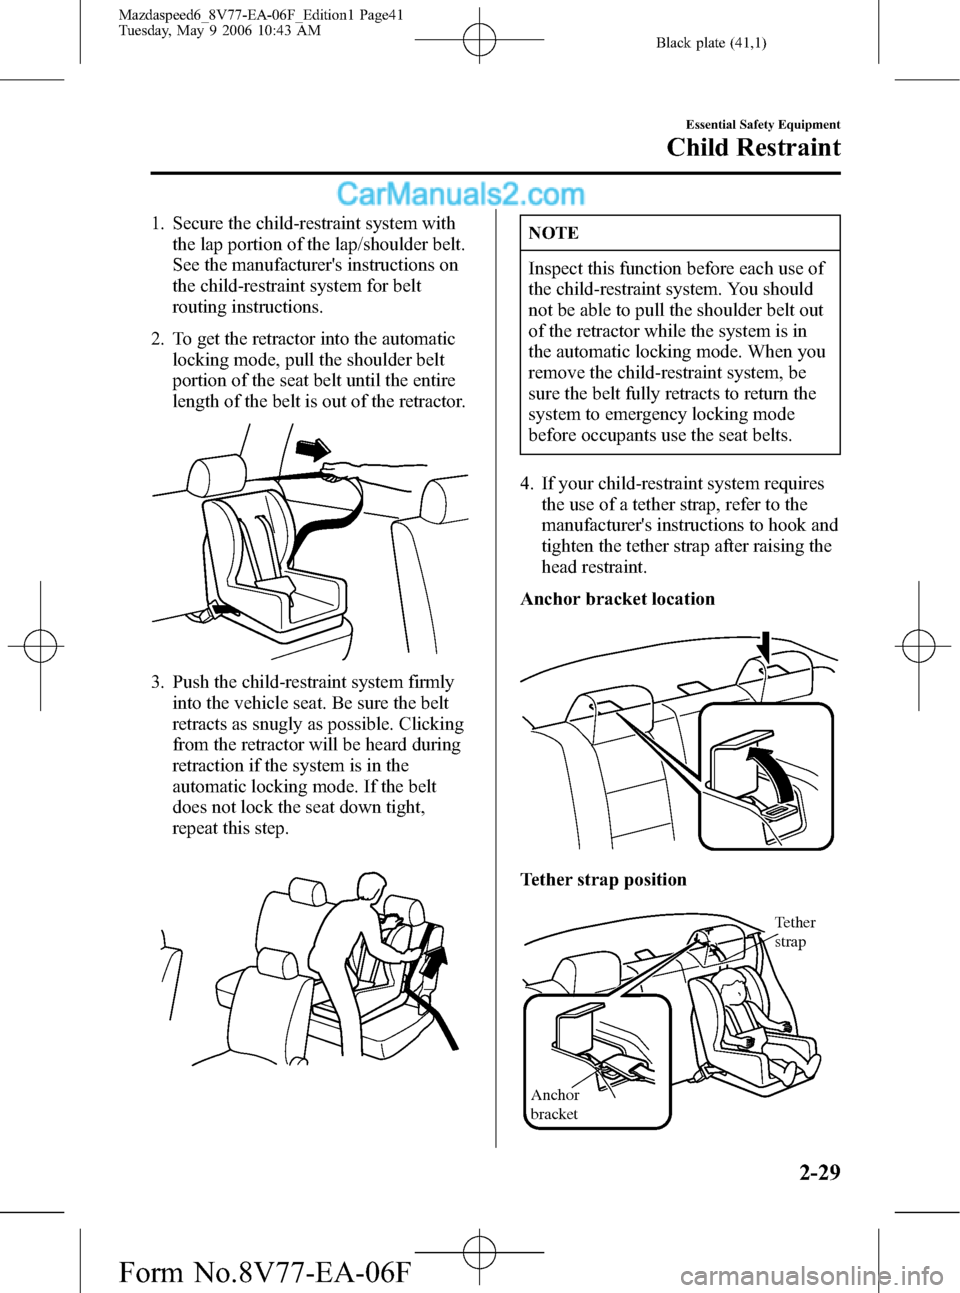 MAZDA MODEL MAZDASPEED 6 2007   (in English) Service Manual Black plate (41,1)
1. Secure the child-restraint system with
the lap portion of the lap/shoulder belt.
See the manufacturers instructions on
the child-restraint system for belt
routing instructions.
